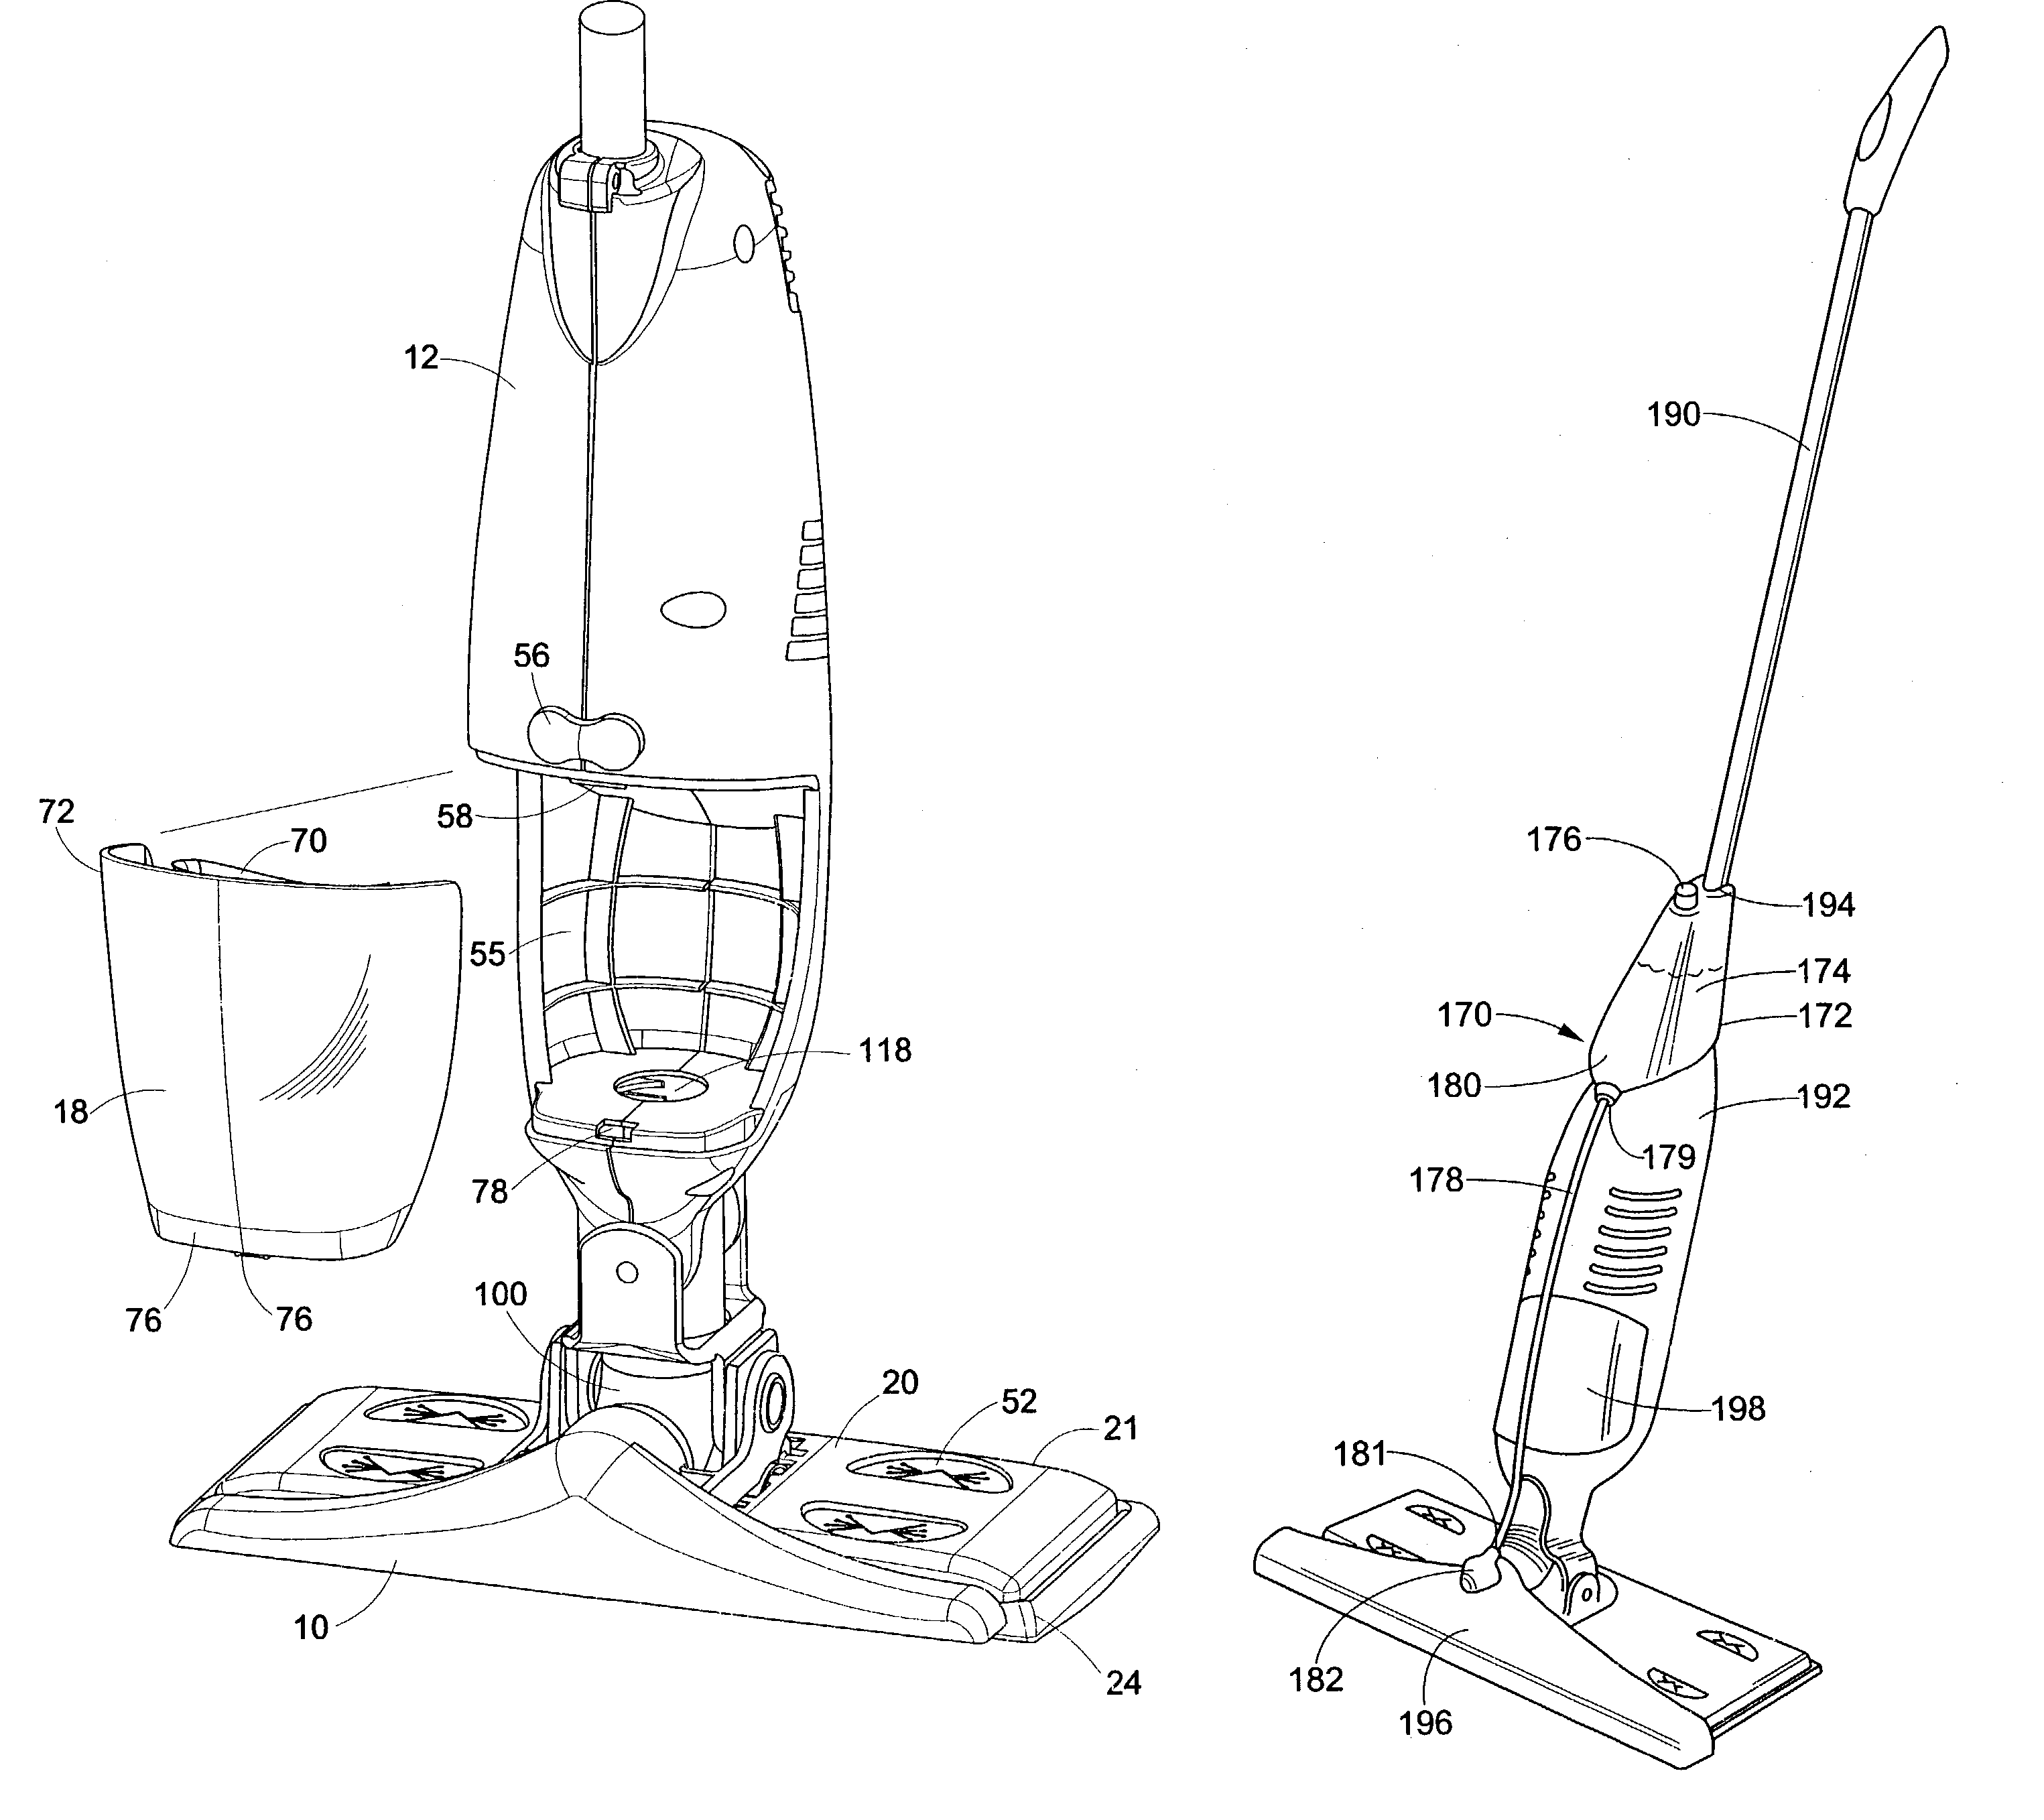 Vacuum cleaner with cleaning pad